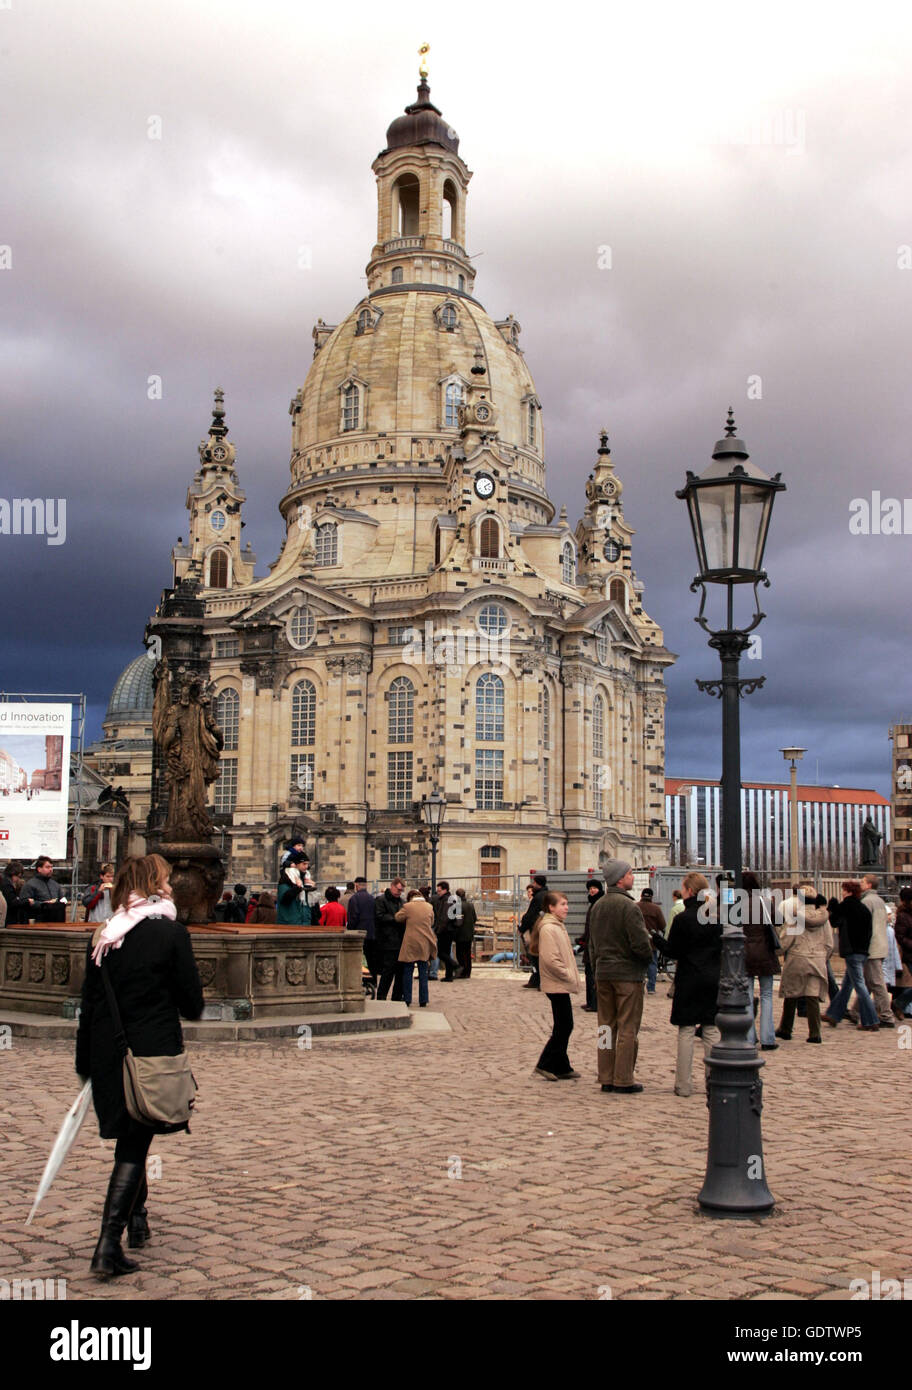 The 60th anniversary of the Bombing of Dresden Stock Photo